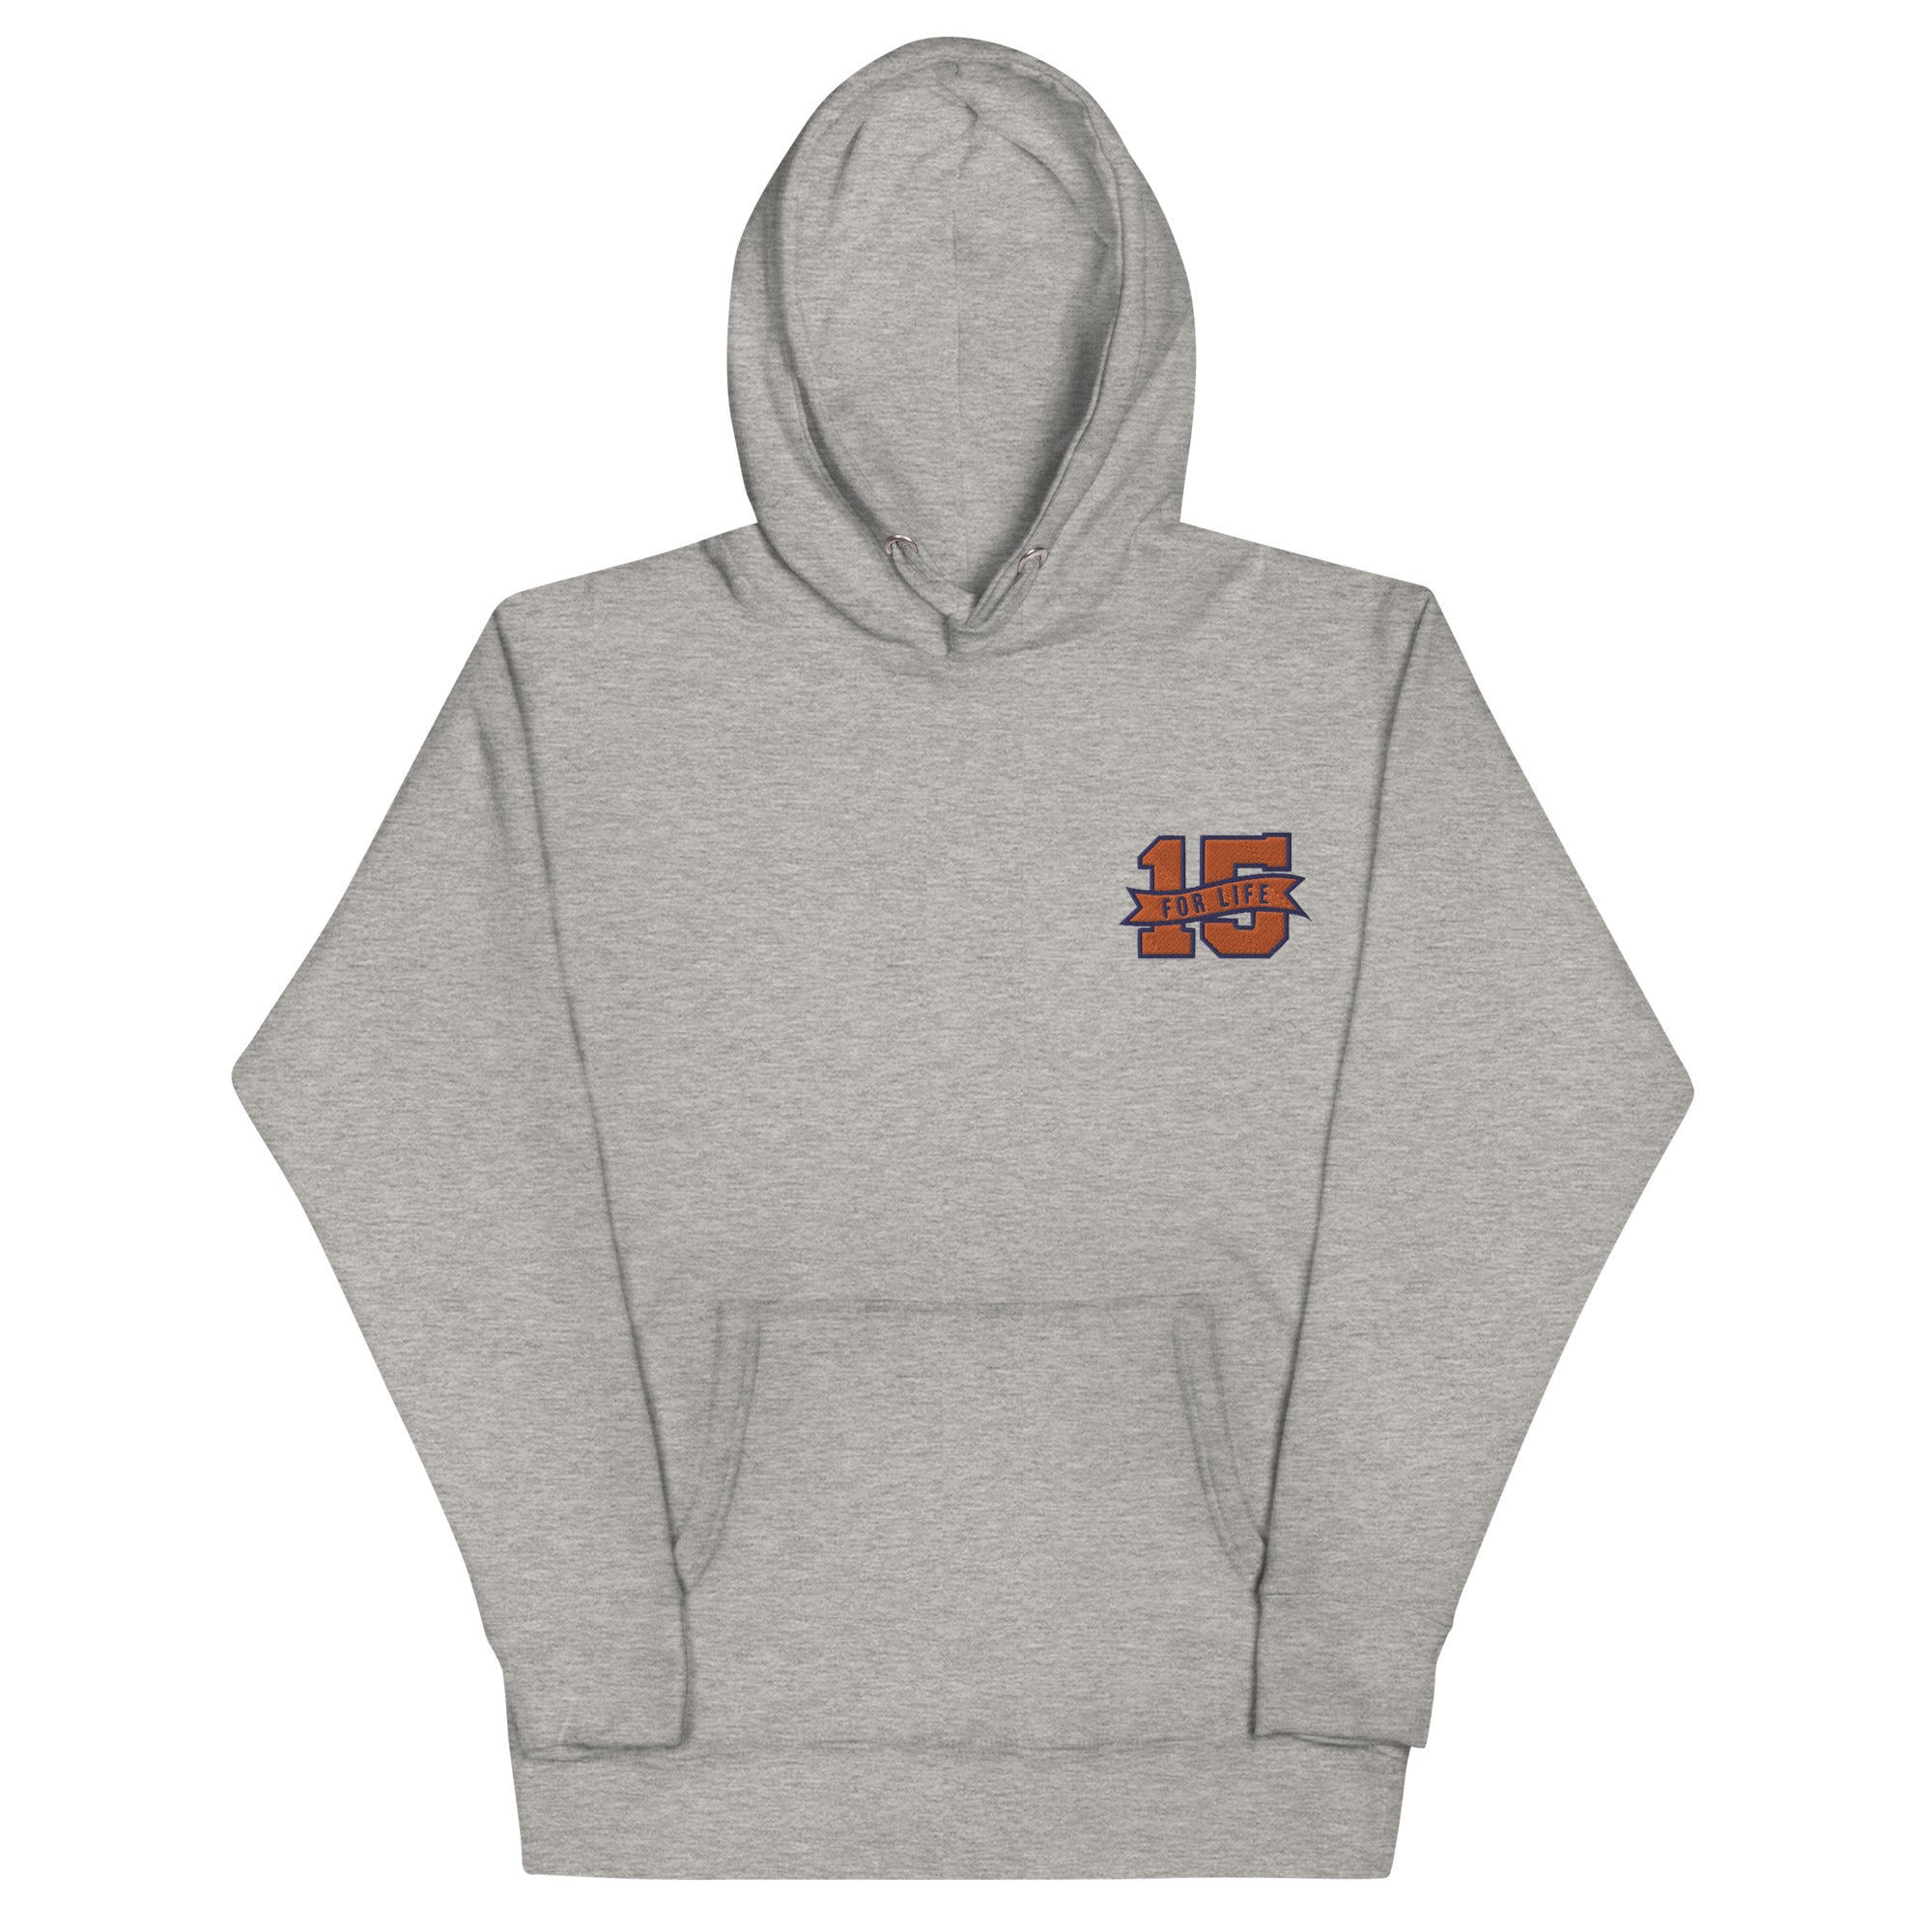 15 For Life Embroidered Unisex Hoodie